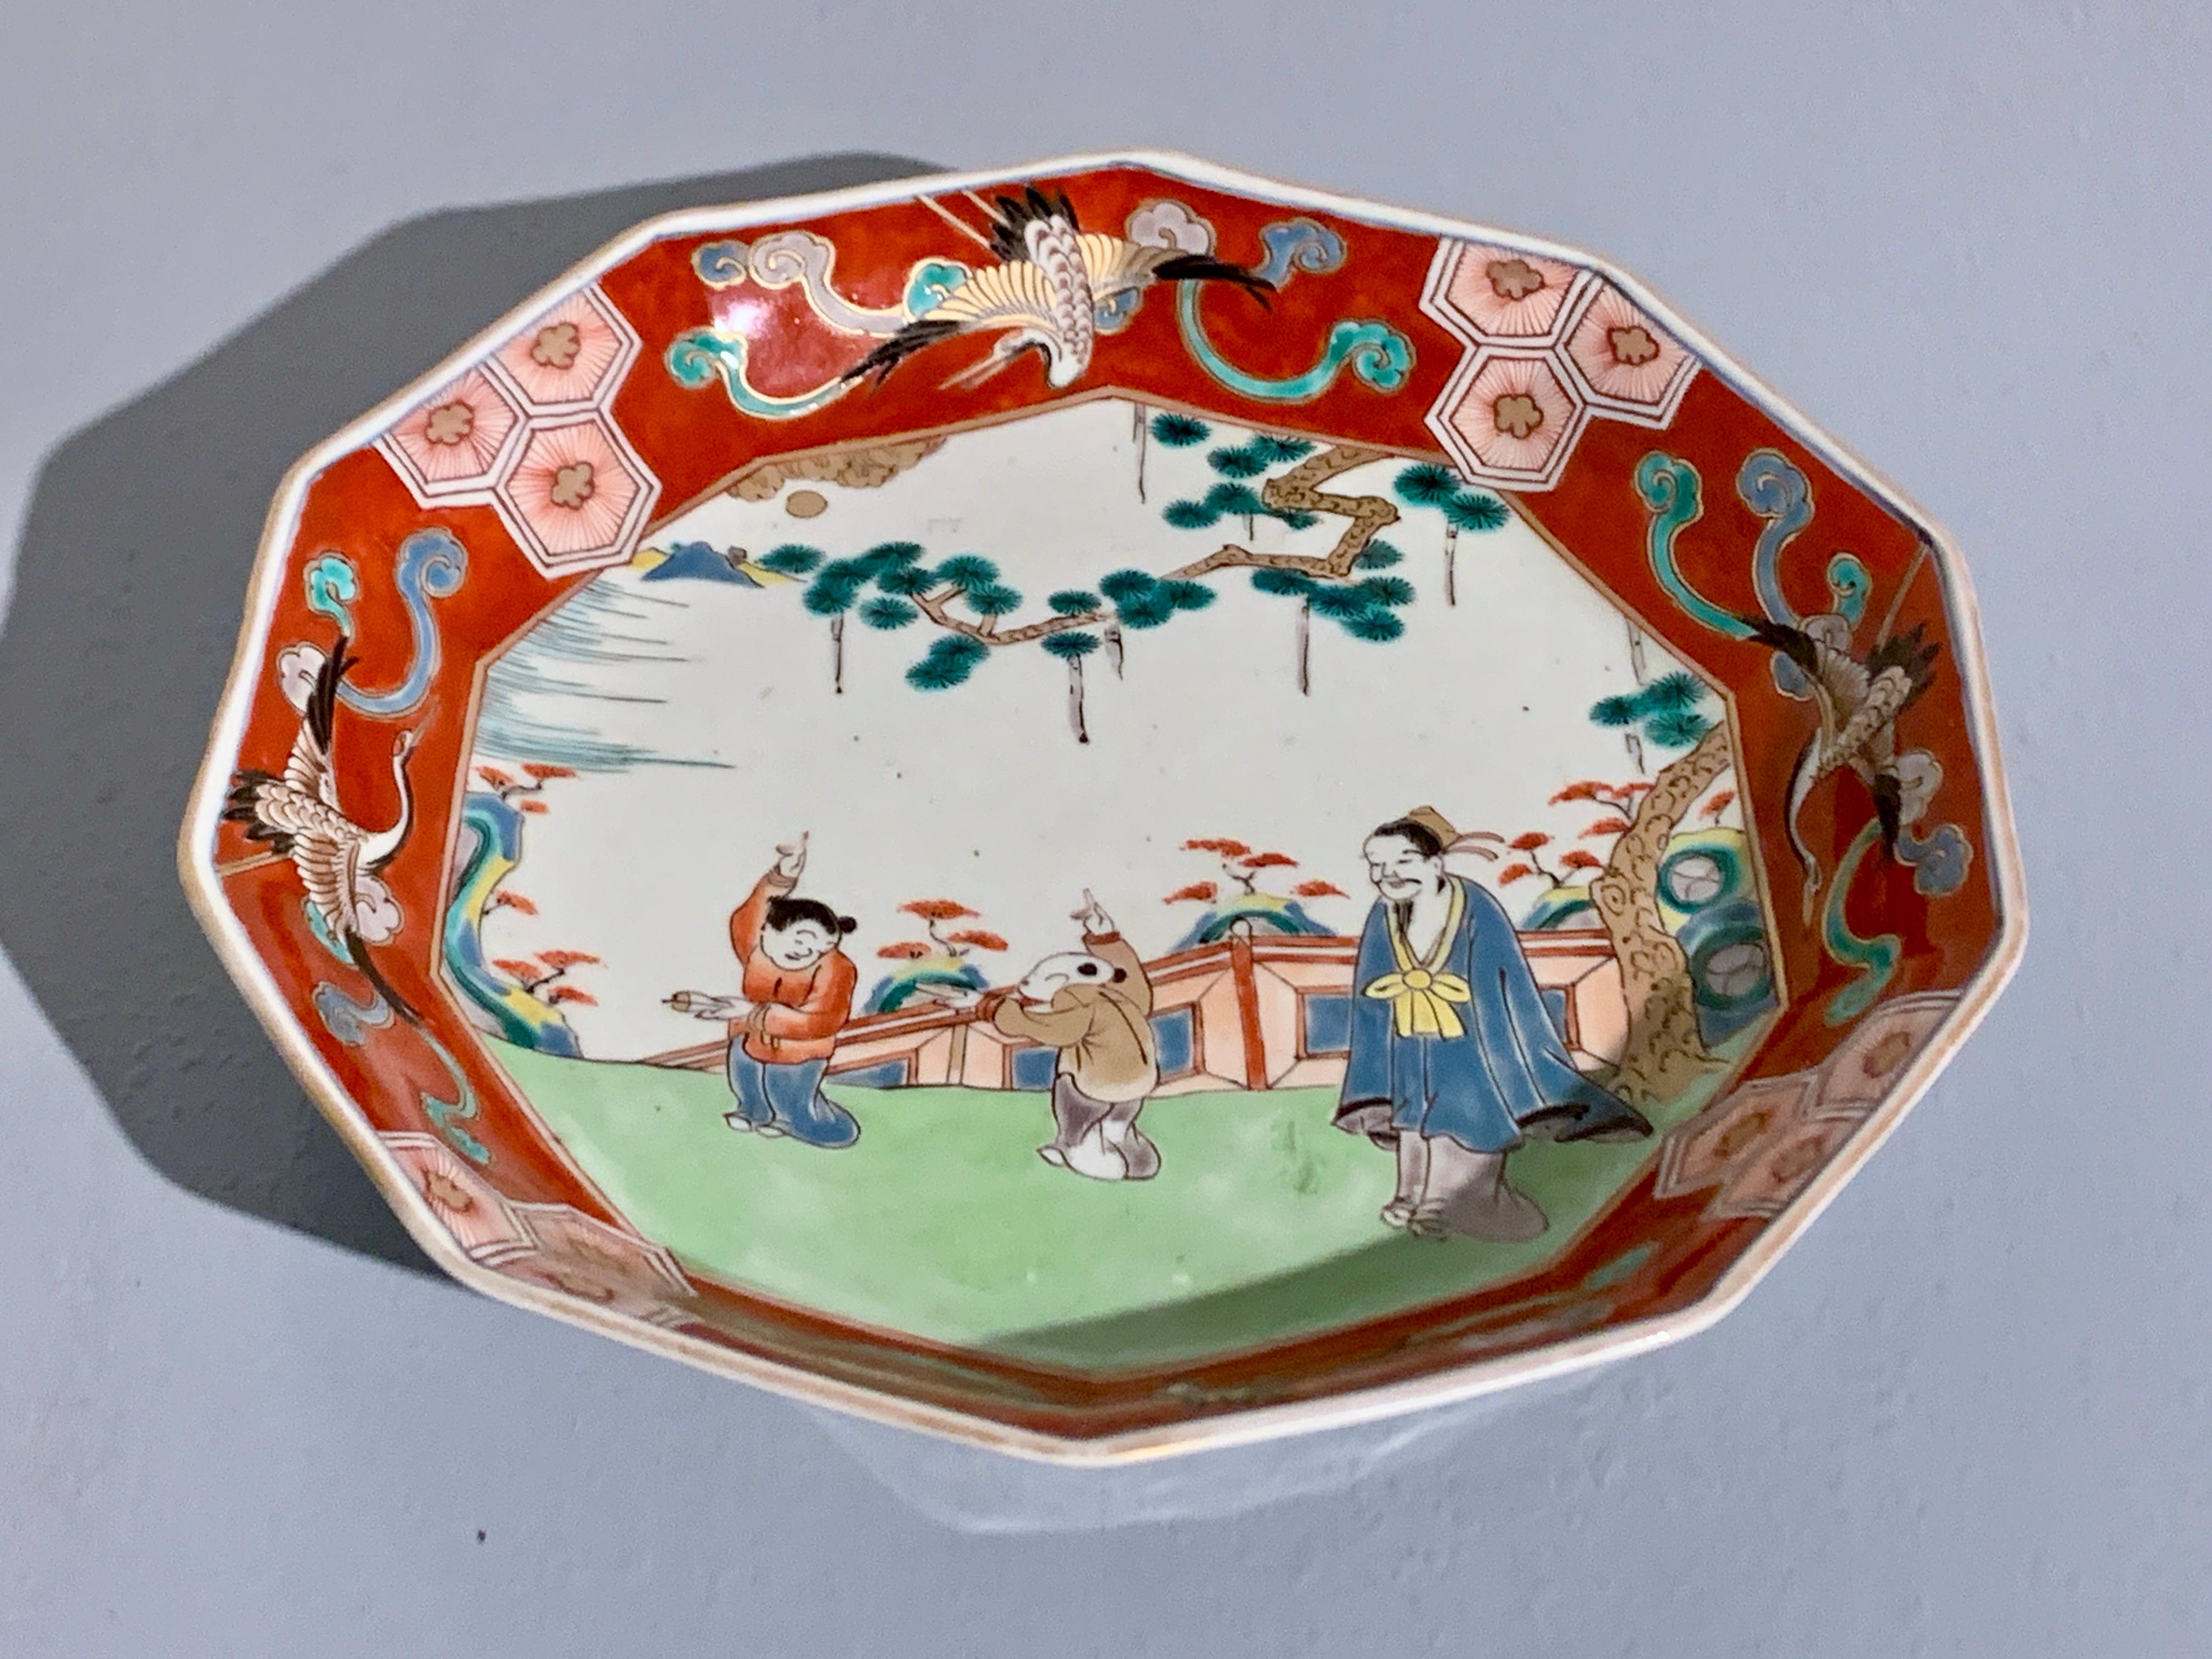 An unusual Japanese Imari porcelain decagonal (ten sided) dish with underglaze blue and overglaze enamels, Edo to Meiji Period, mid 19th century, Japan.

The ten sided dish features a charming Chinese inspired scene to the interior with a Taoist